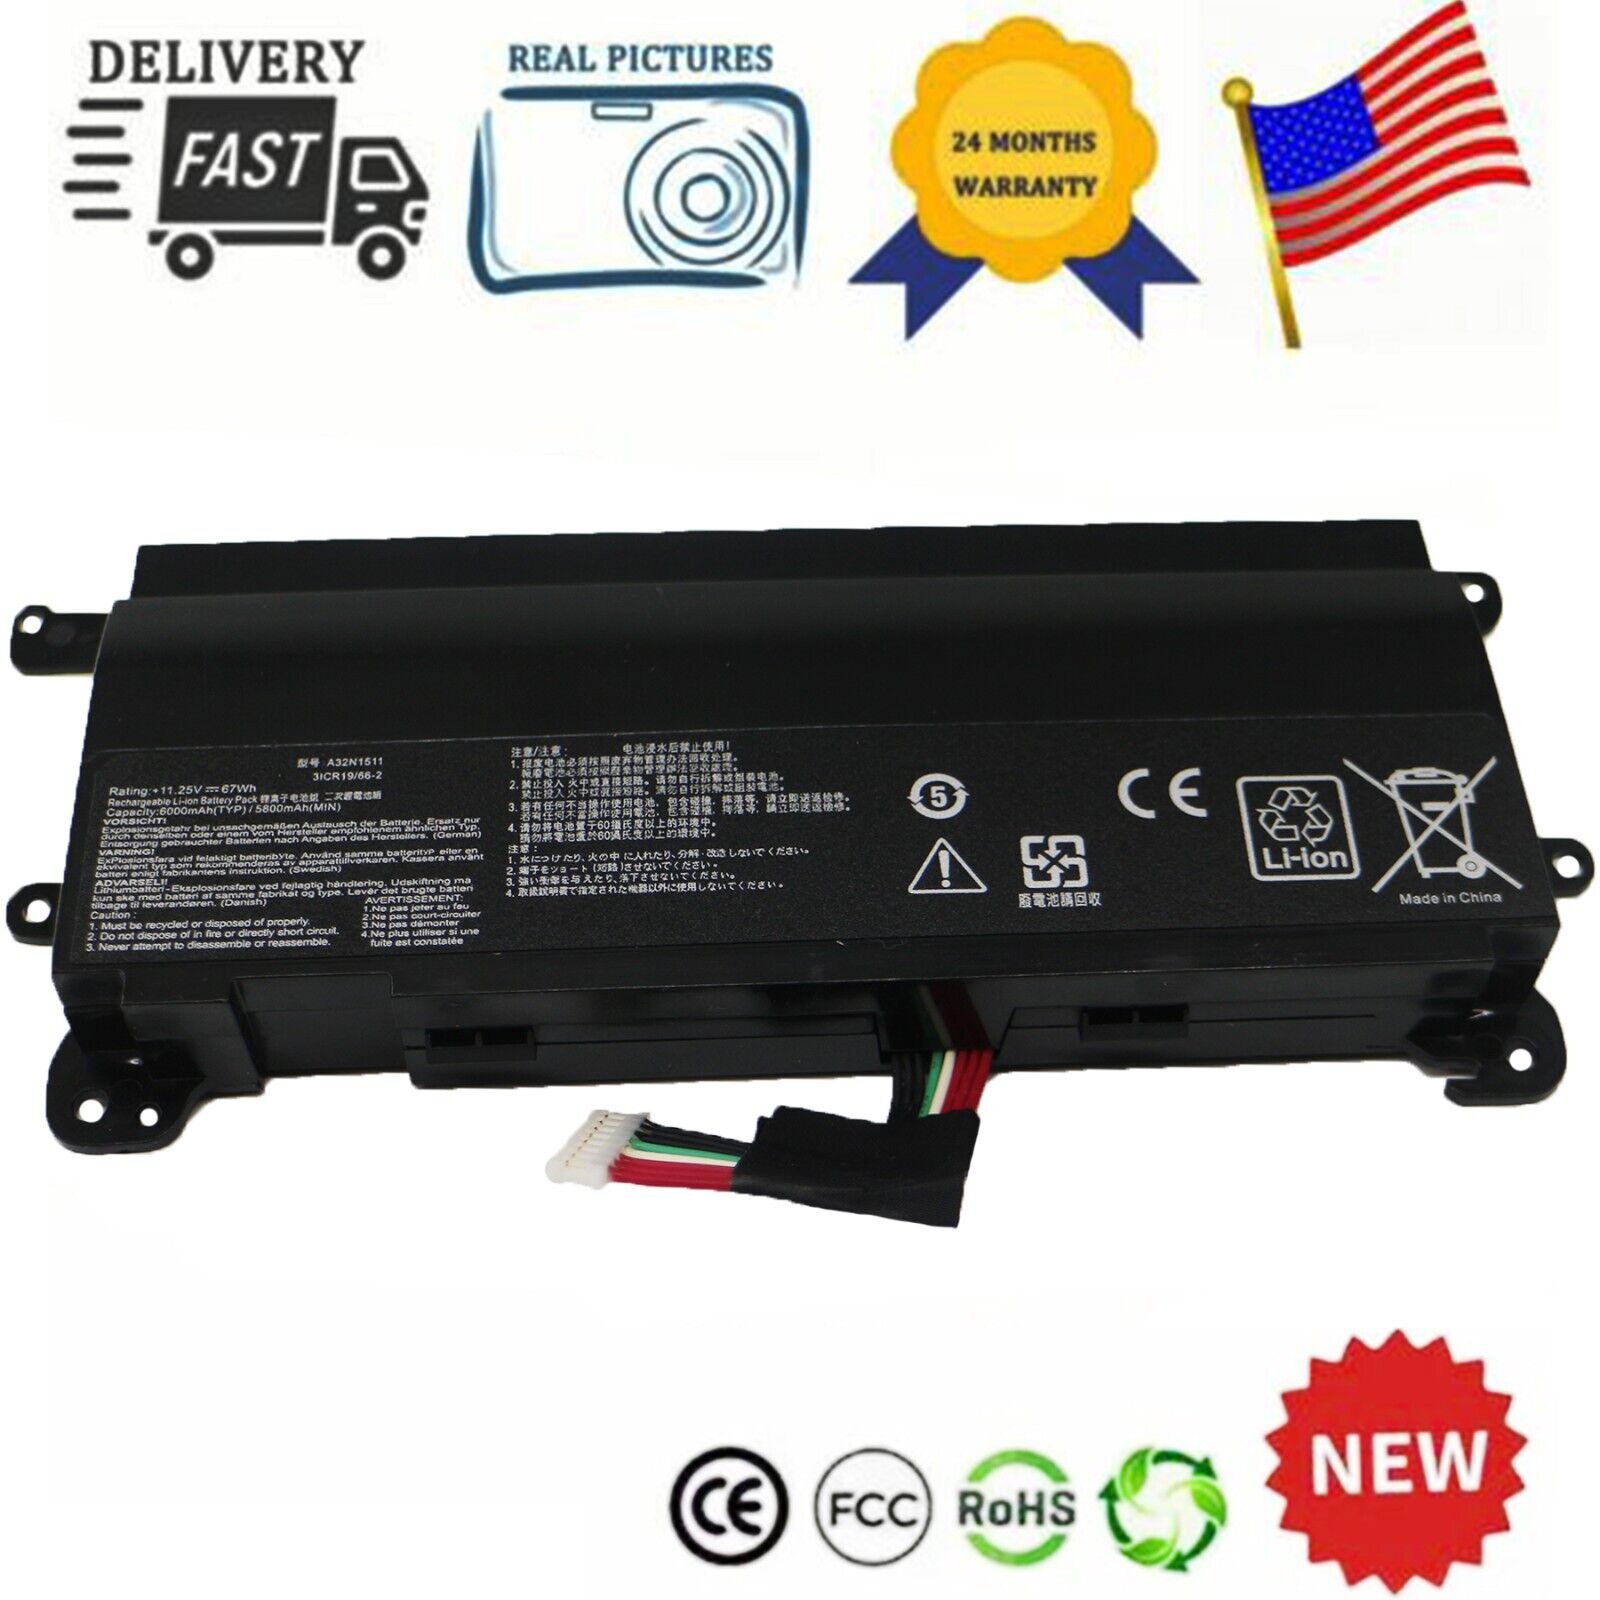 A32N1511 Battery for ASUS ROG G752 G752V G752VL G752VT G752VM G752VY G752VS 67Wh